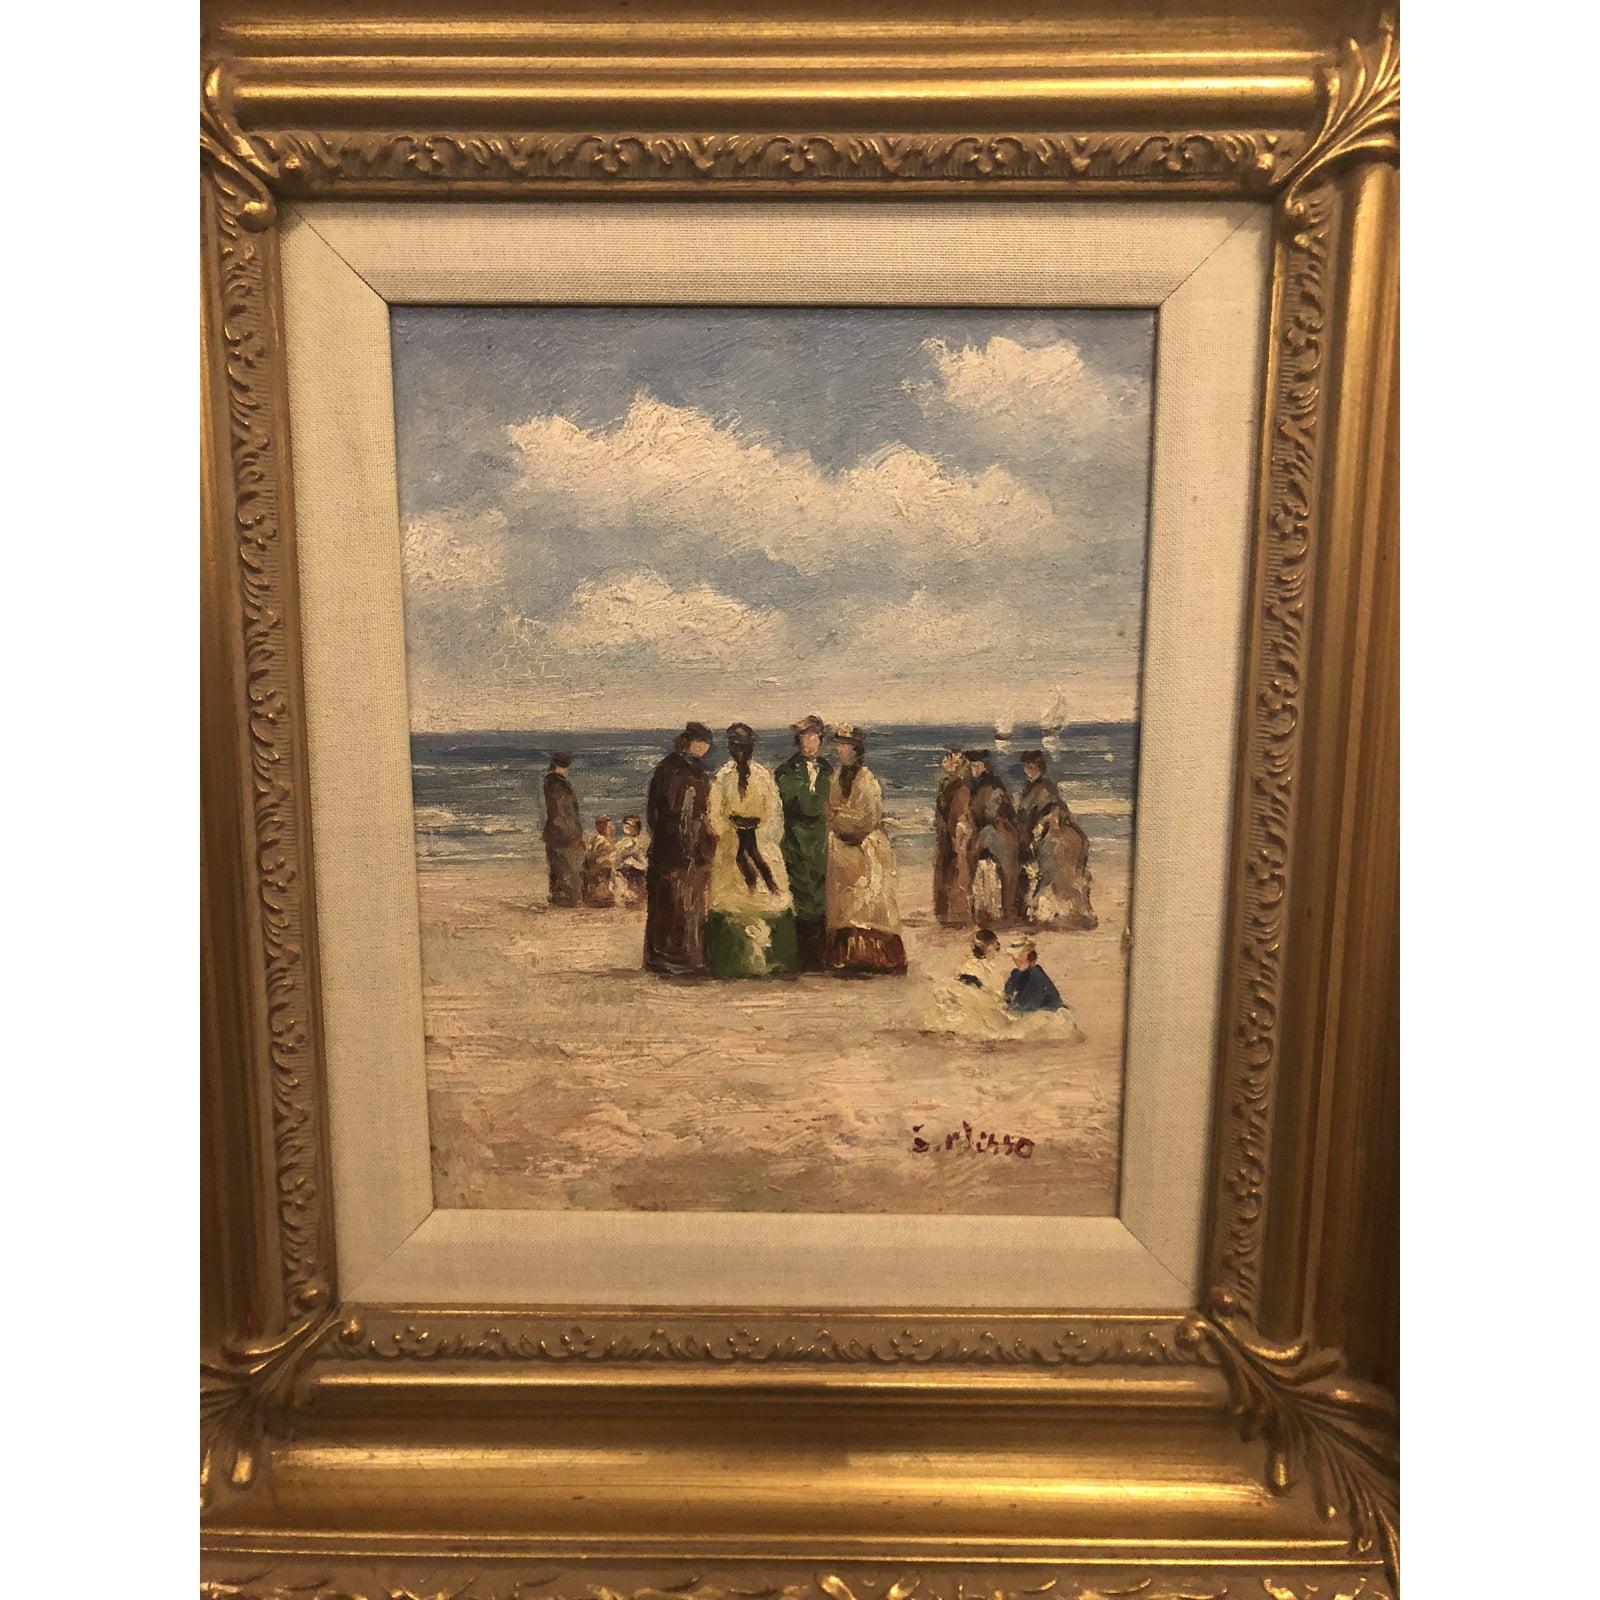 This is an oil on canvas painting depicting a group of people, seaside. The gilt frame is finely hand carved. 
The piece is from the 1980s.

Dimensions:

Framed 18